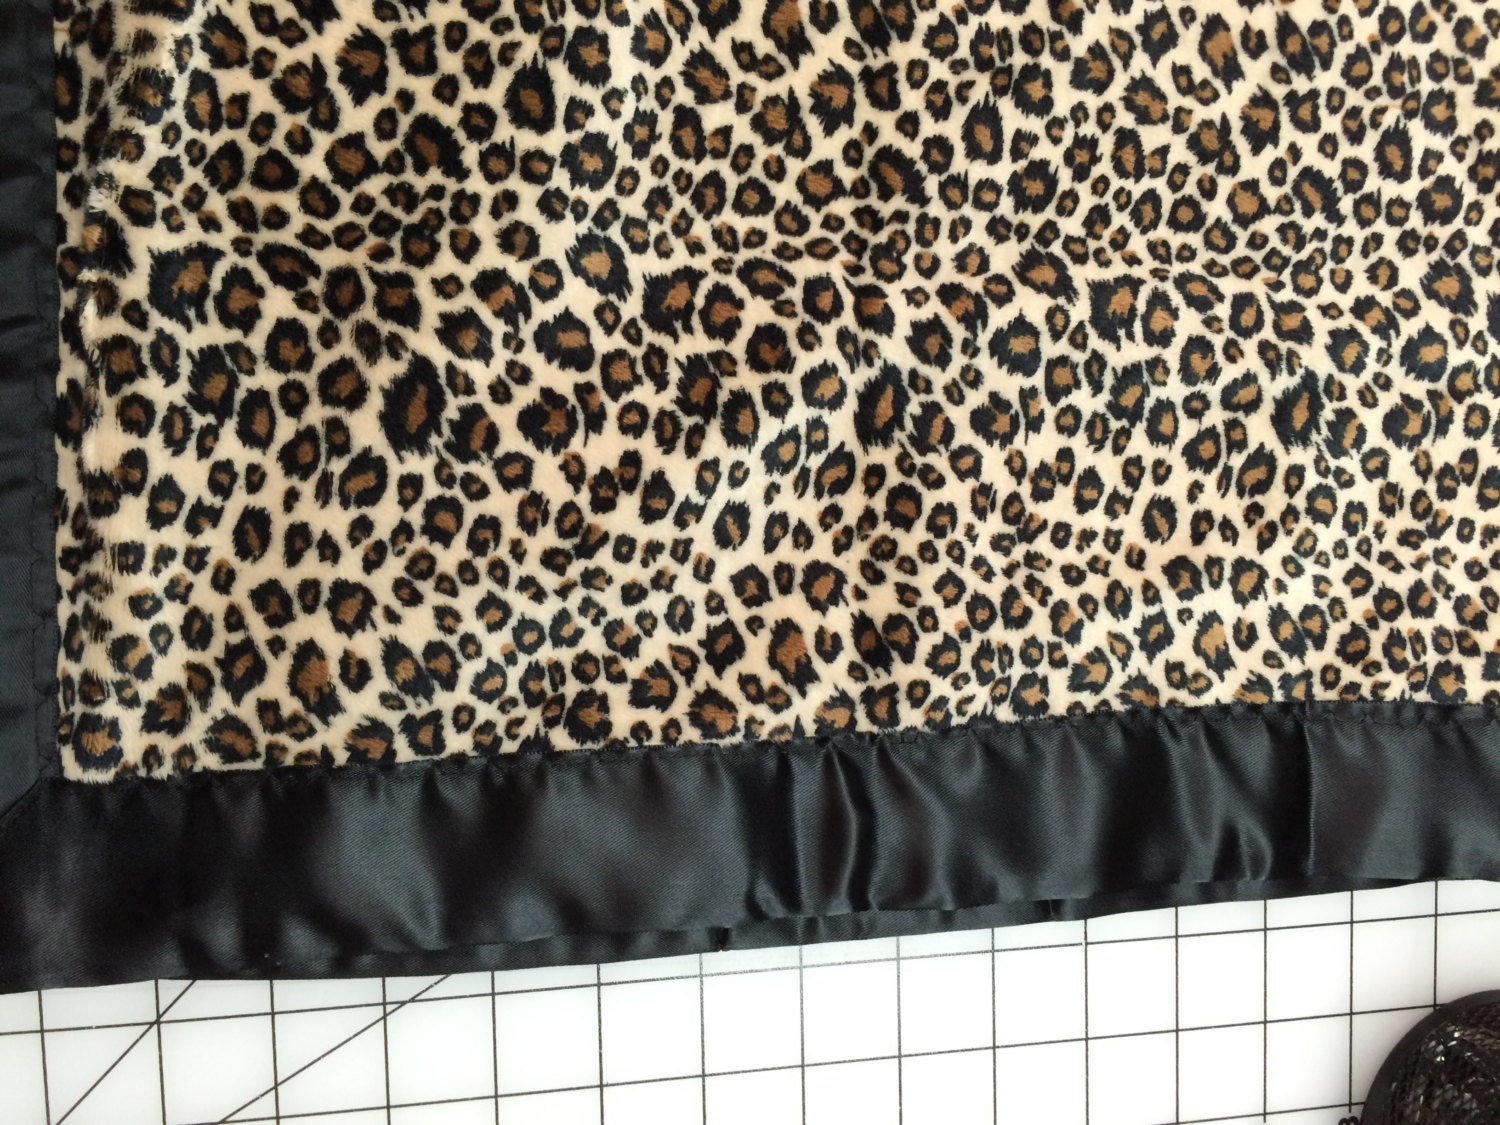 Minky cheetah 30 x 35 baby car seat blanket with gold satin backing and ...